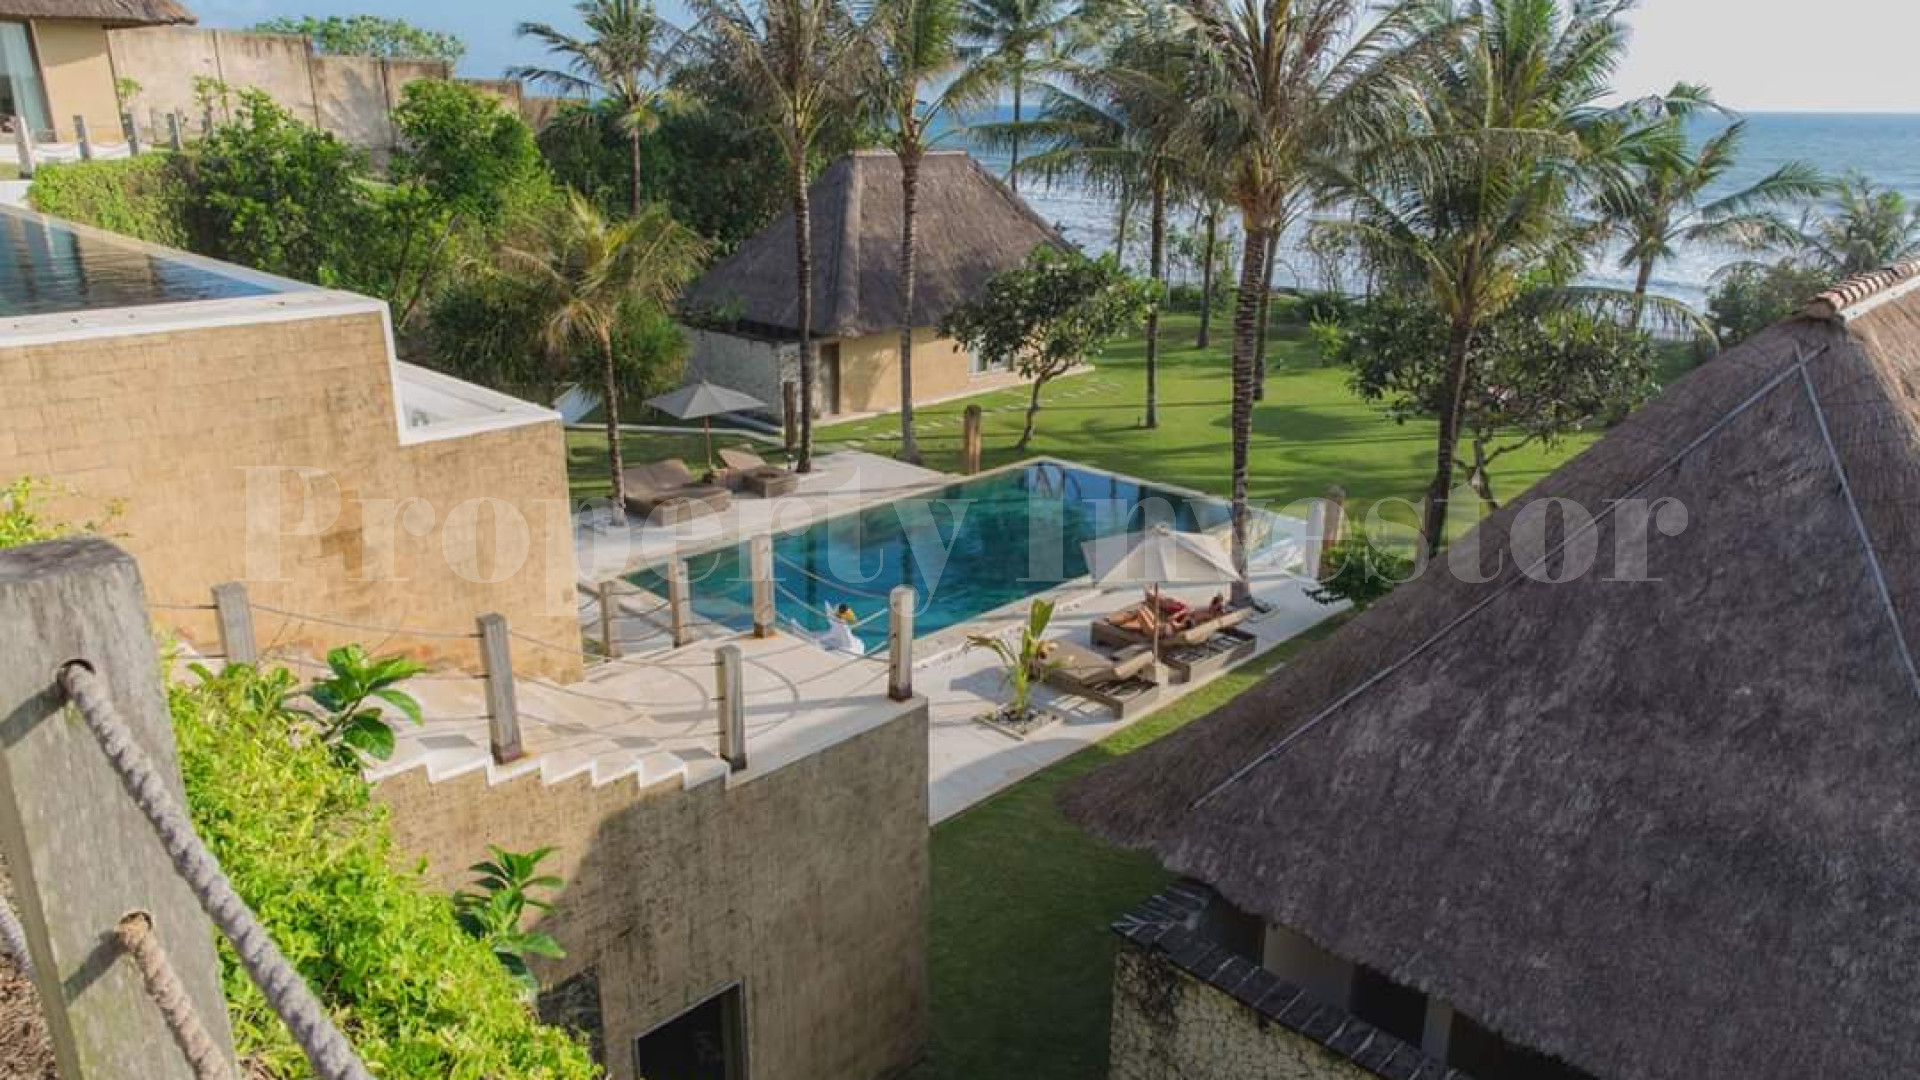 Chic Commercial Beachfront Estate with 4 Luxury Residences (17 Bedrooms) and Spacious Gardens & Pools in Tabanan, Bali